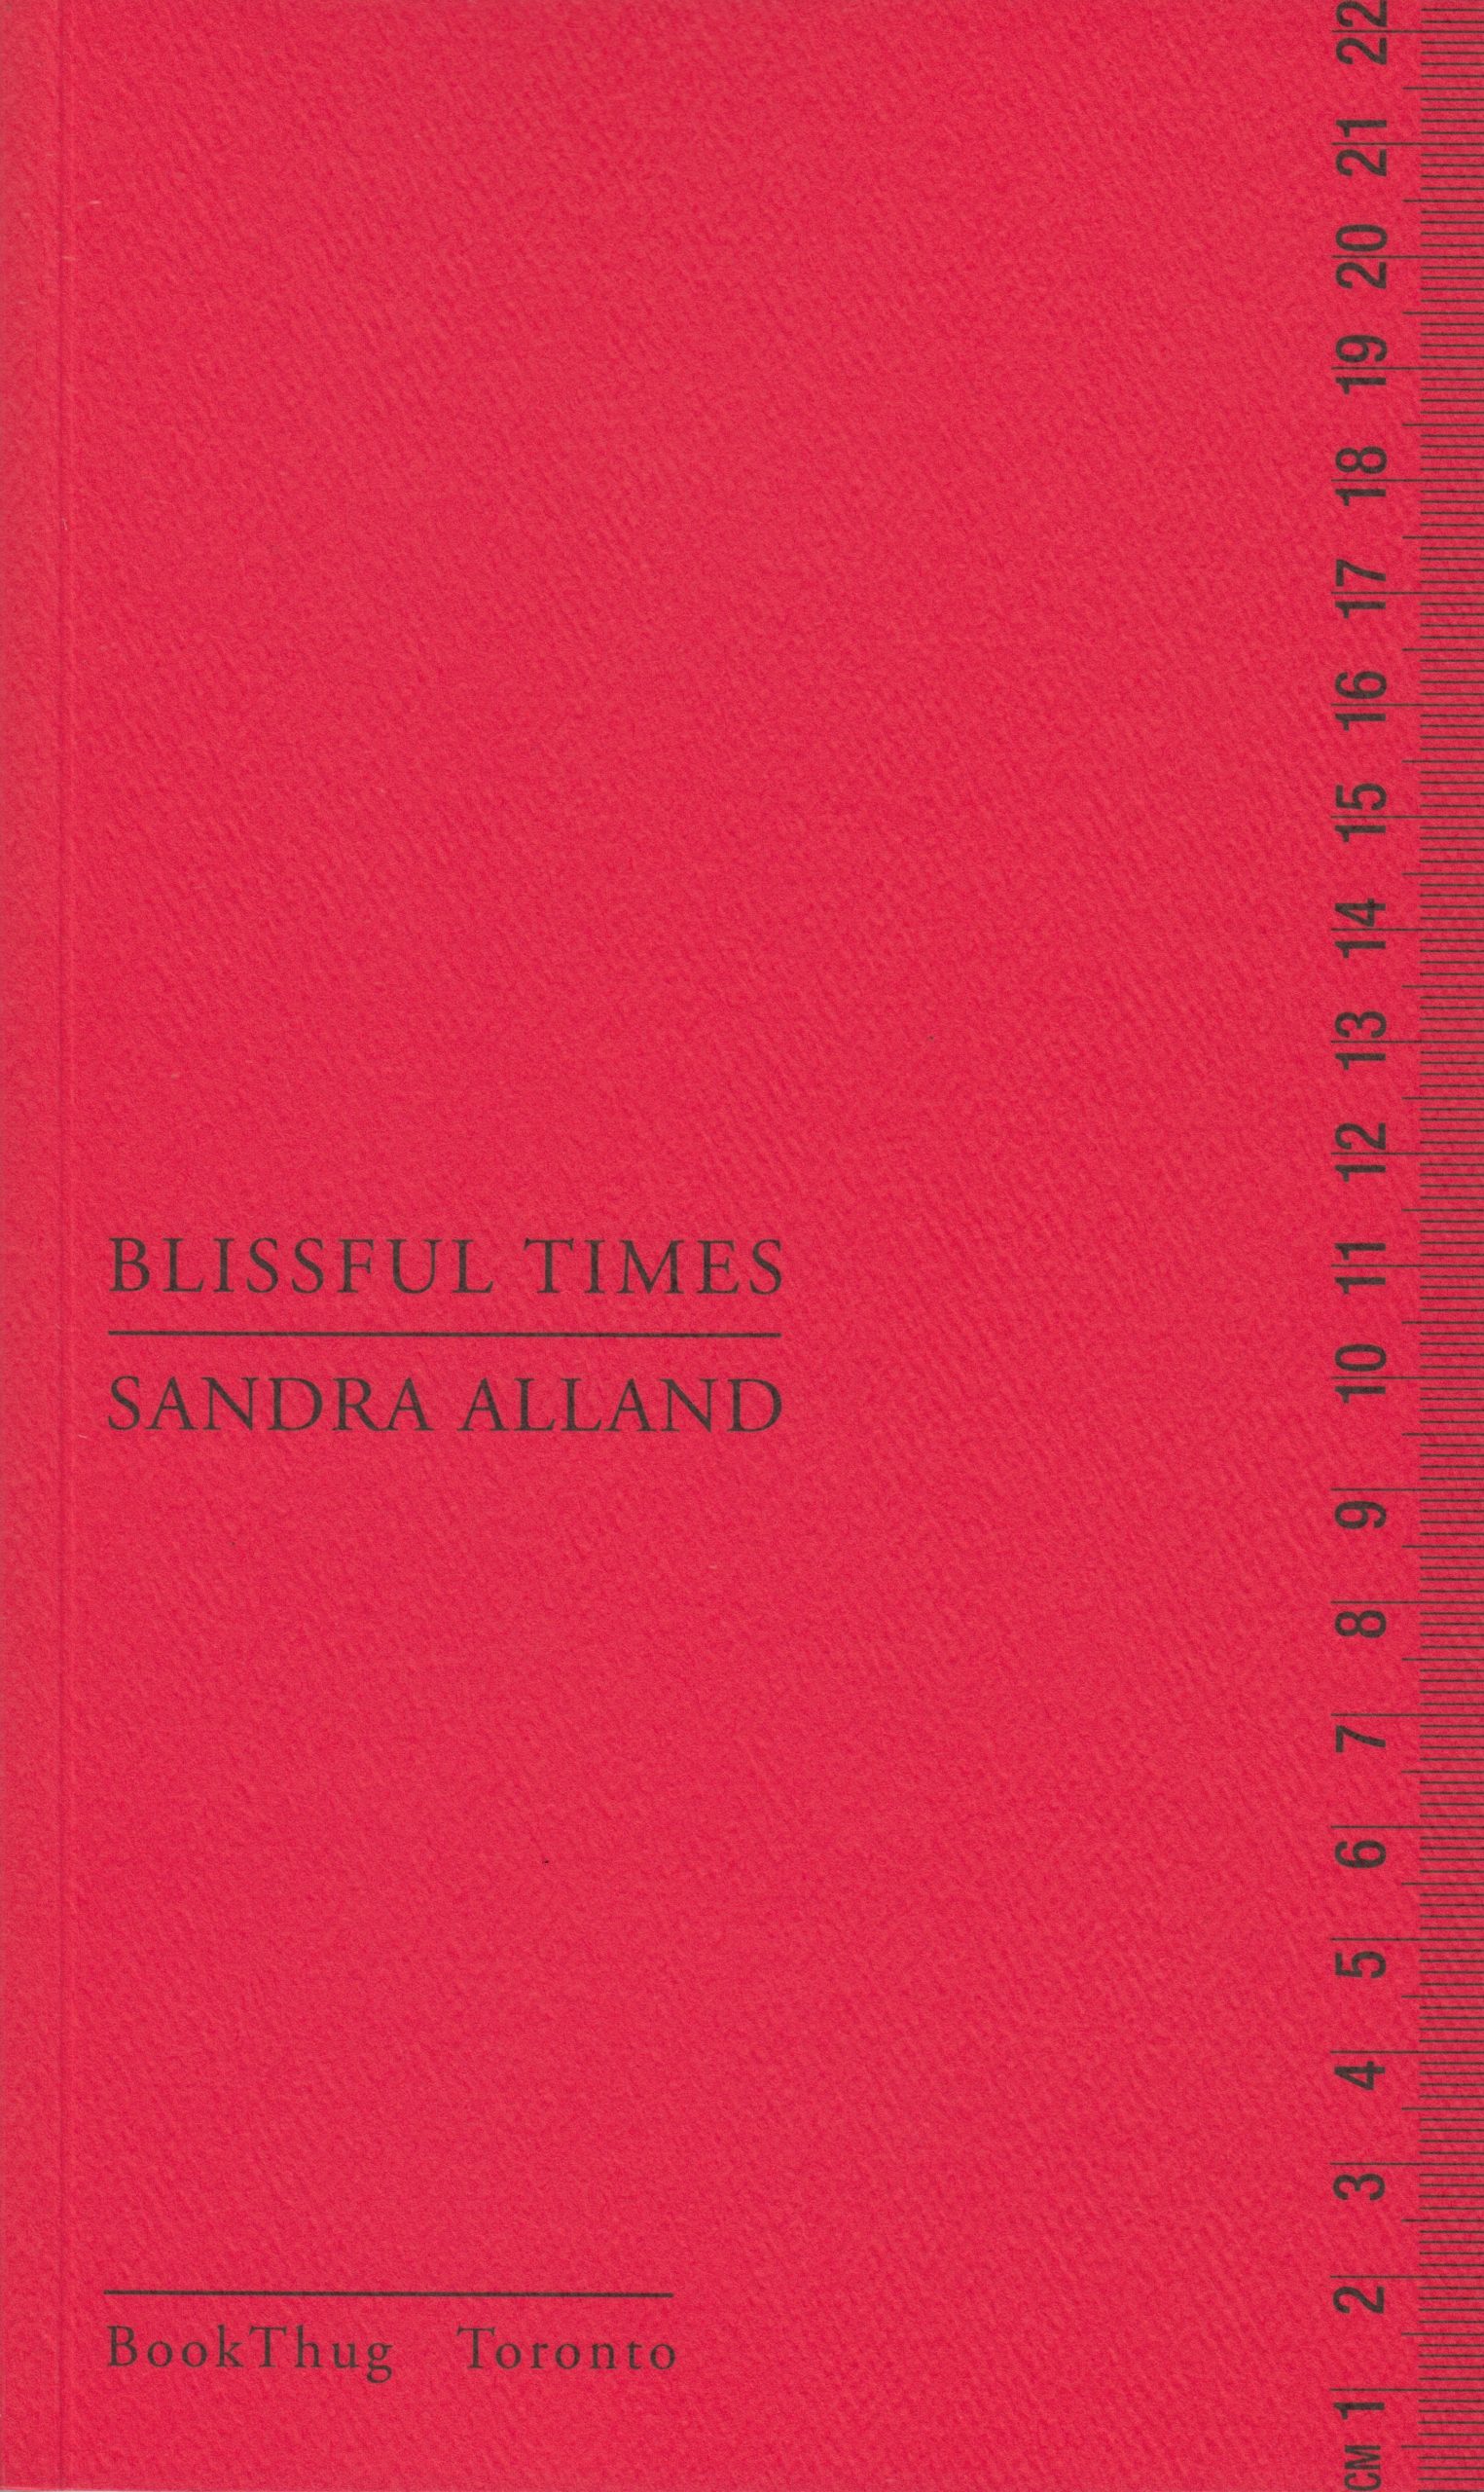 The cover of Blissful Times by Sandra Alland. The cover is red with black text of the title, author and publisher name. Running up the right margin is a ruler in centimetres. It reaches 22. The paper is thick and rough, inviting touch.